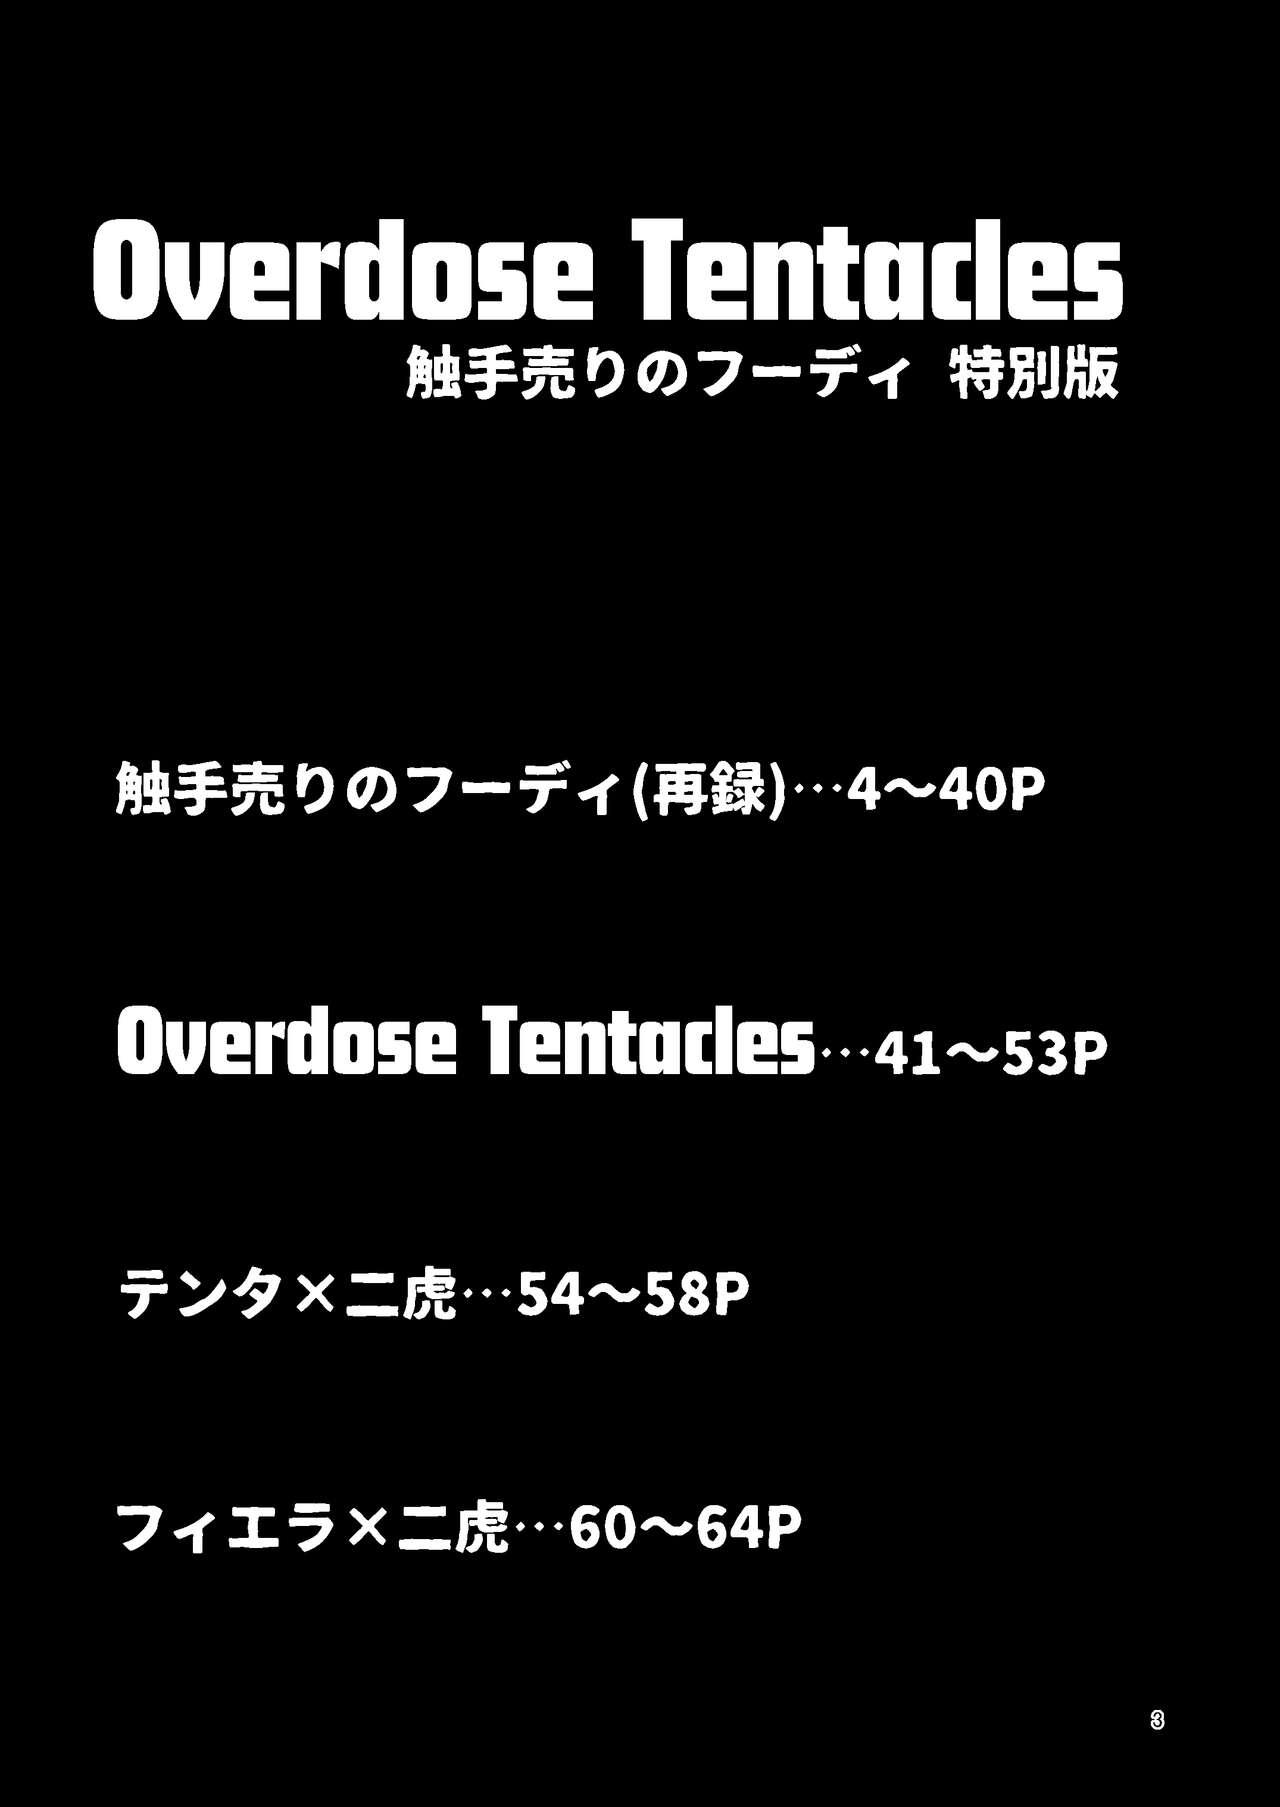 Cut Overdose Tentacles Shokushu Uri no Hoodie special edition Aussie - Page 2